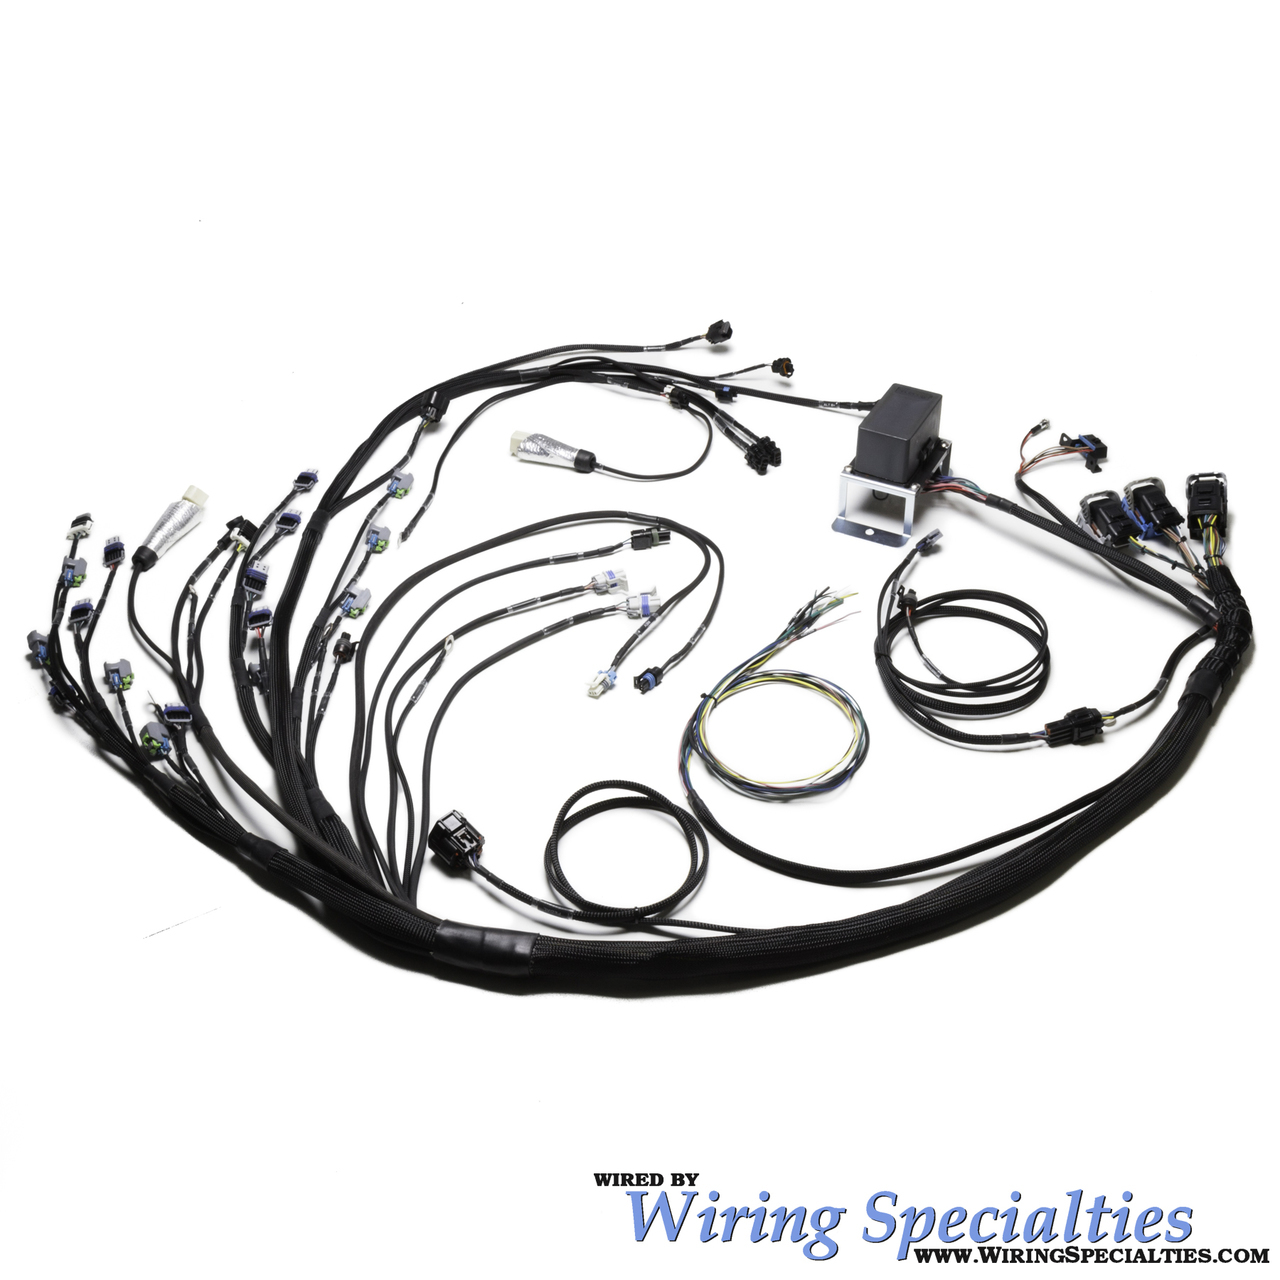 Bmw E30 Wiring Harness from www.sikky.com